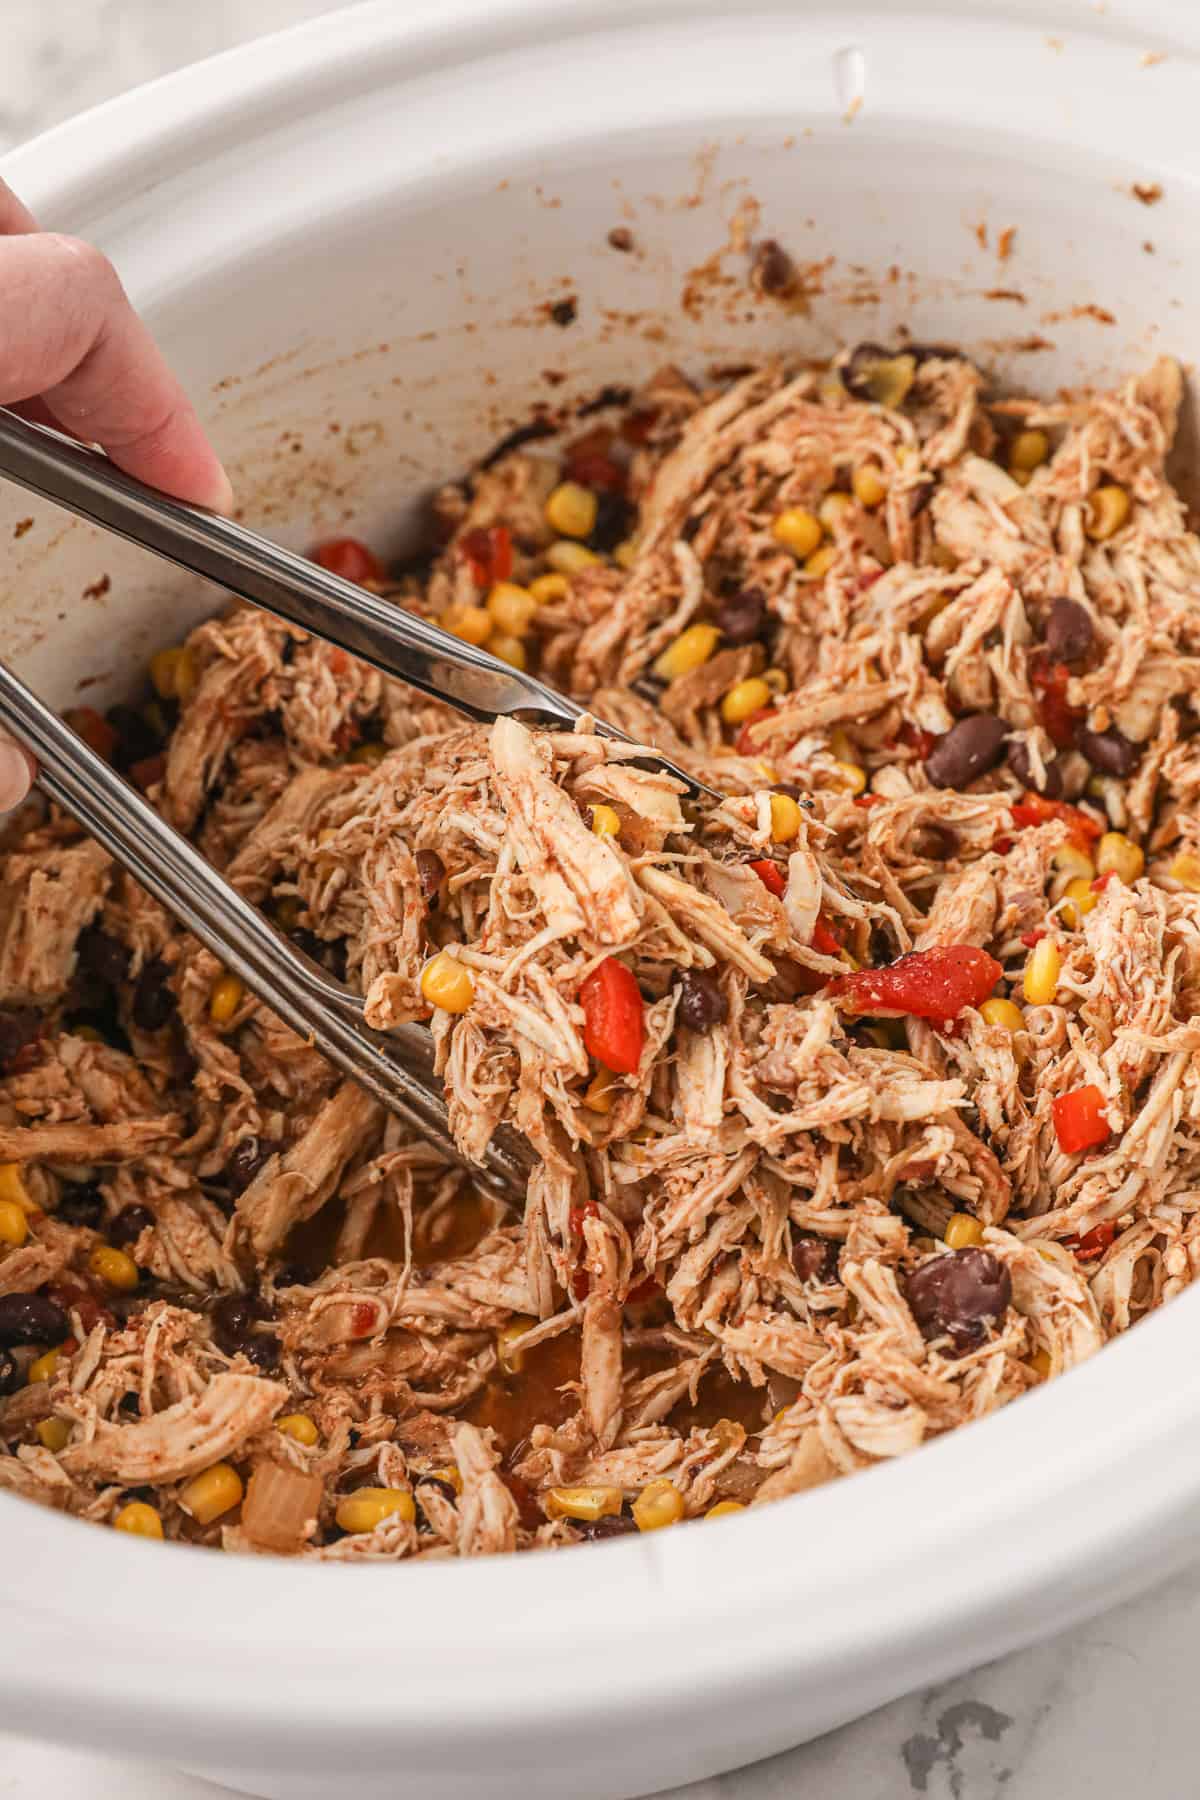 Metal tongs scooping shredded chicken from a white slow cooker.